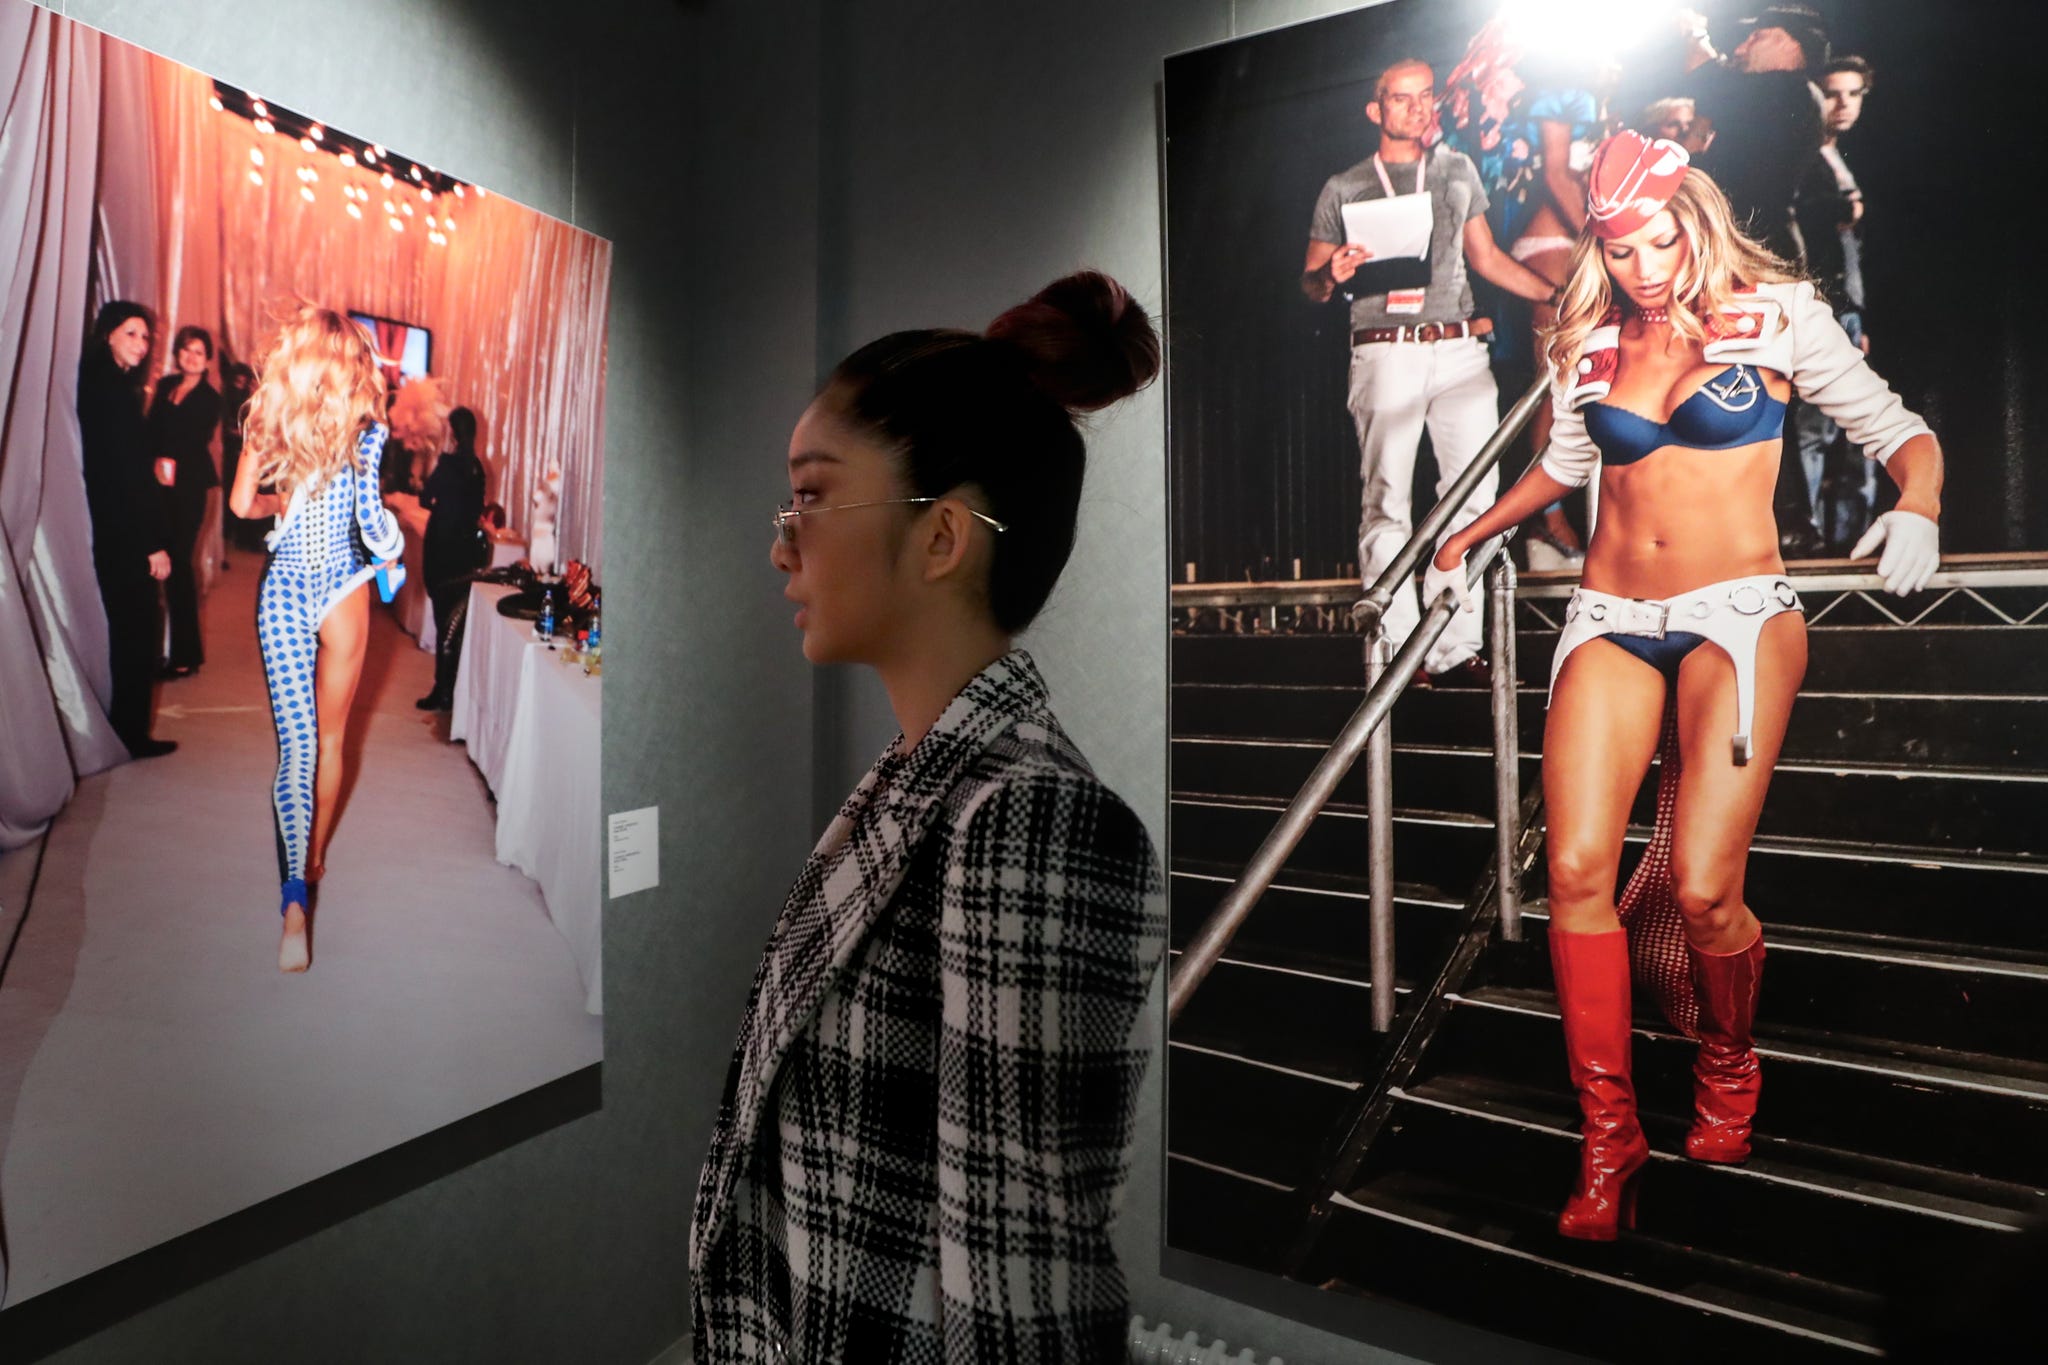 st petersburg, russia   february 27, 2020 a woman attends an exhibition of works by australian photographer russell james titled a decade backstage at victorias secret fashion show at the erarta museum of contemporary art alexander demianchuktass photo by alexander demianchuk\tass via getty images